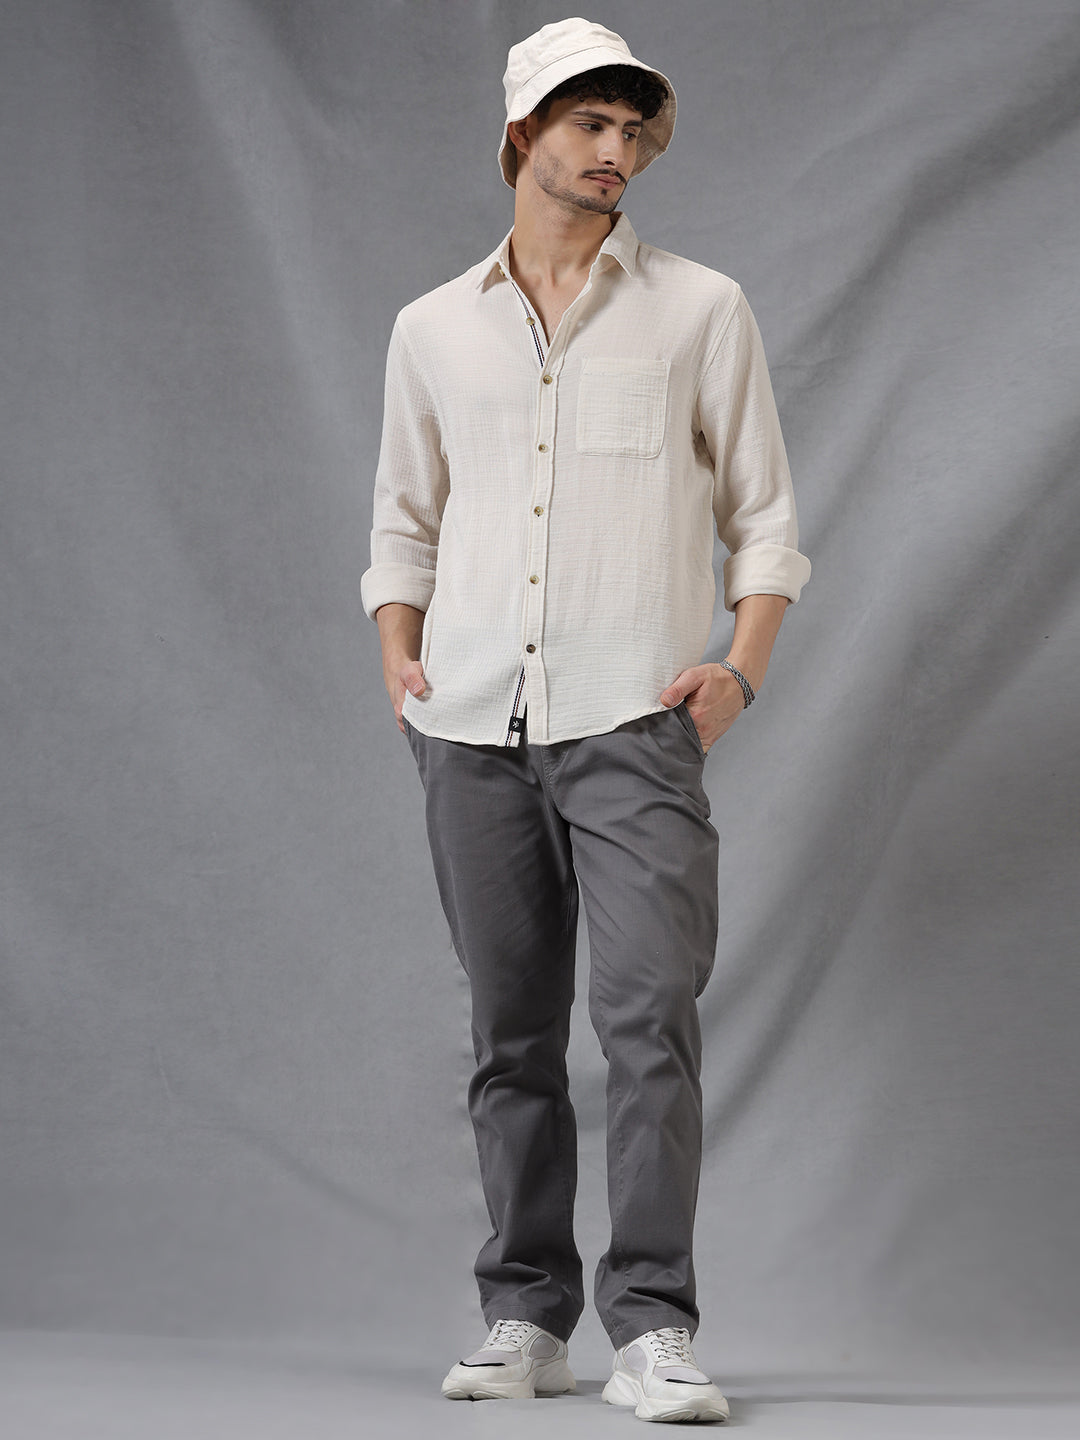 Do light grey jeans go well with a white shirt? - Quora